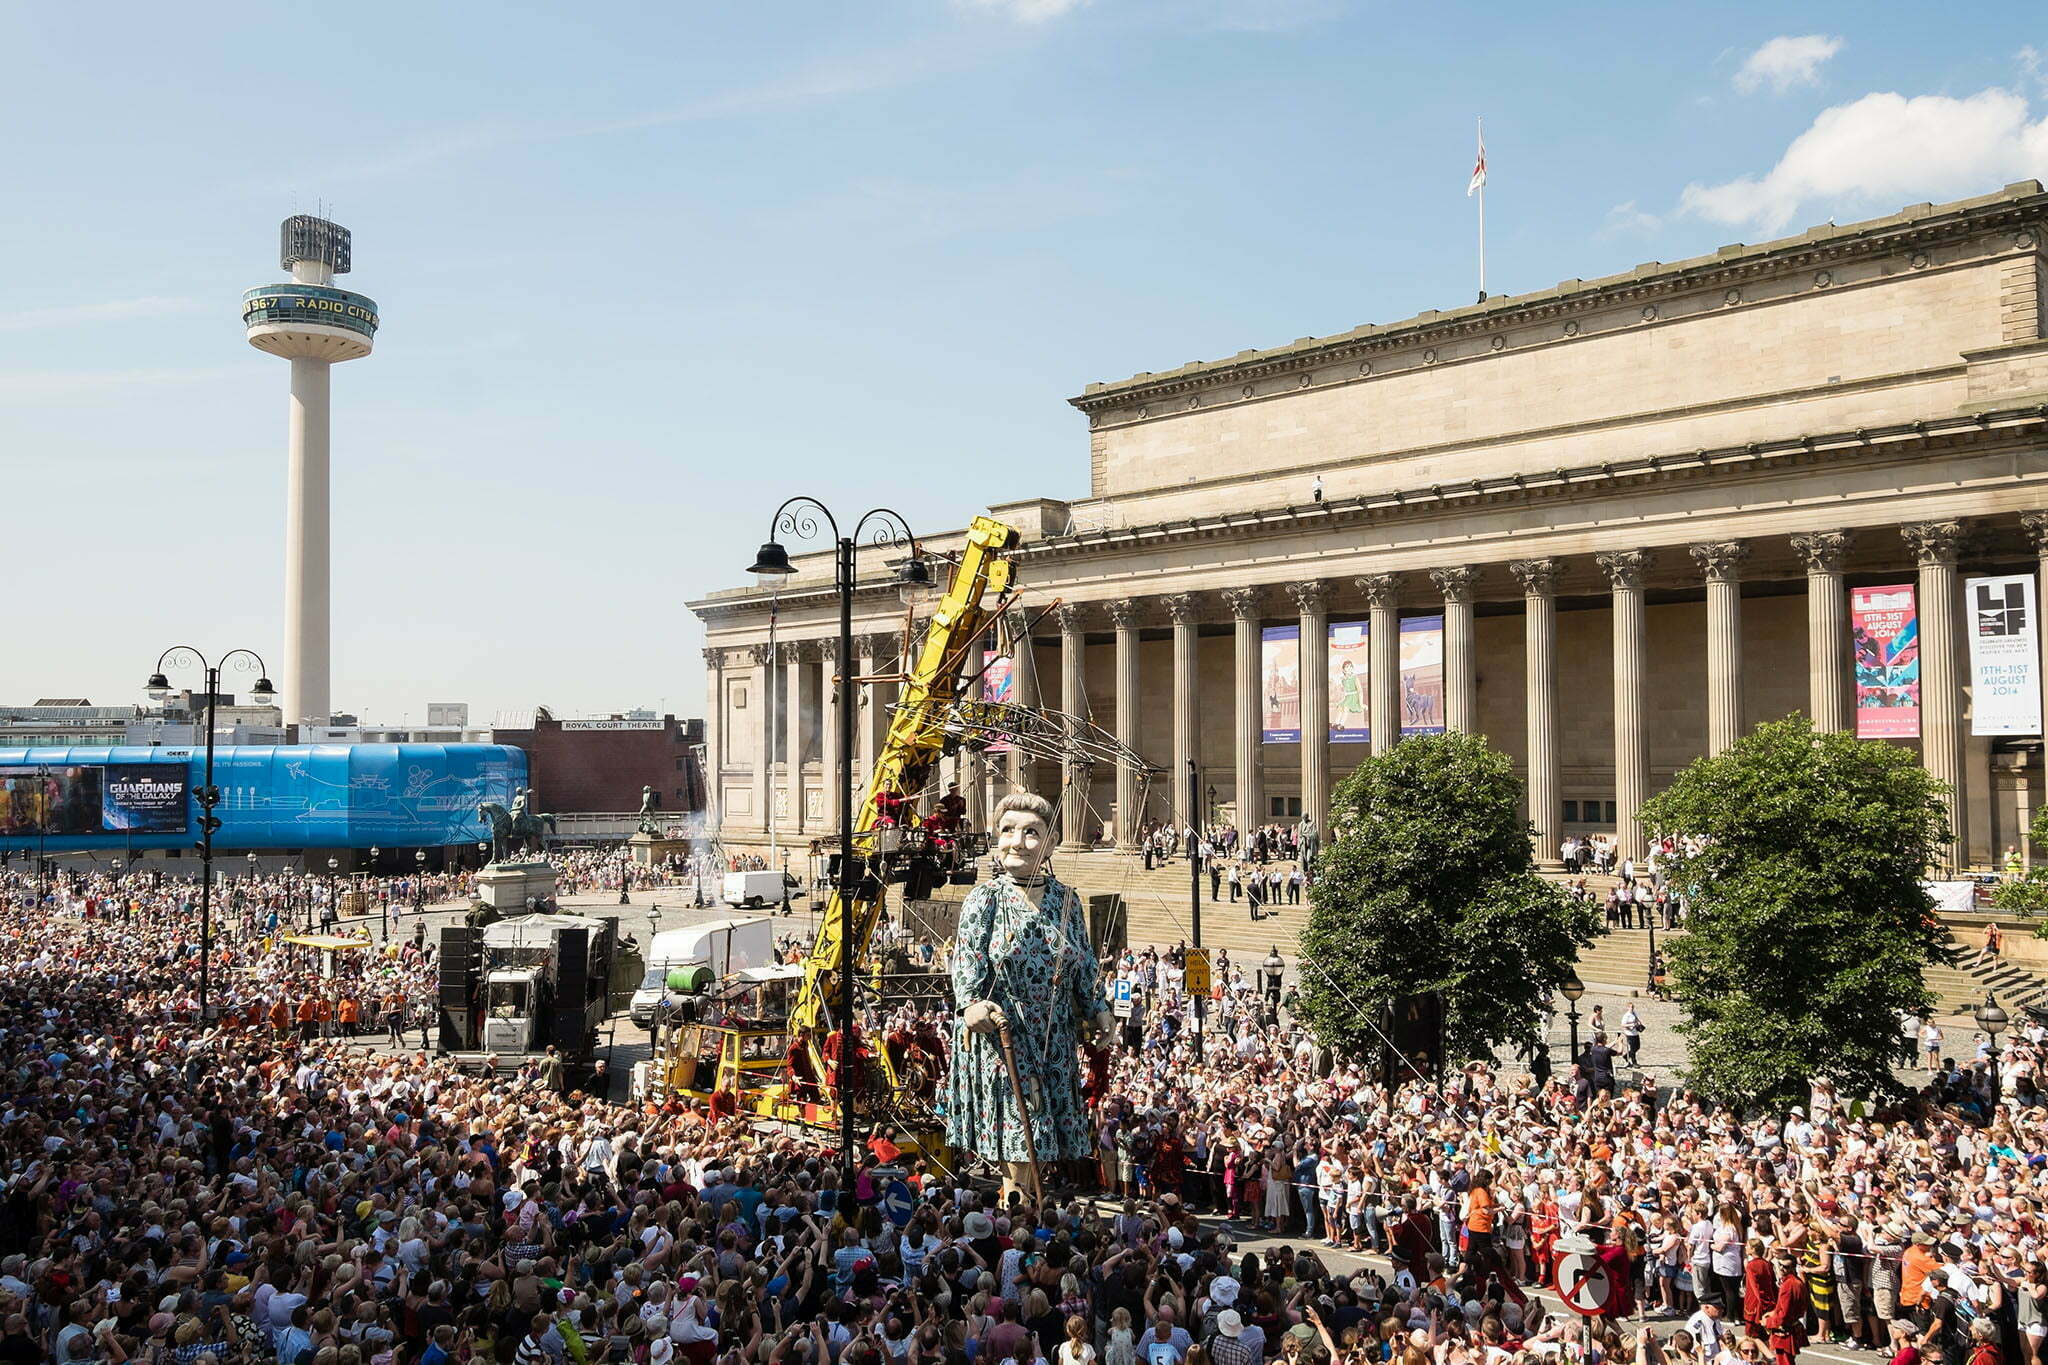 Giants in Liverpool – first full day